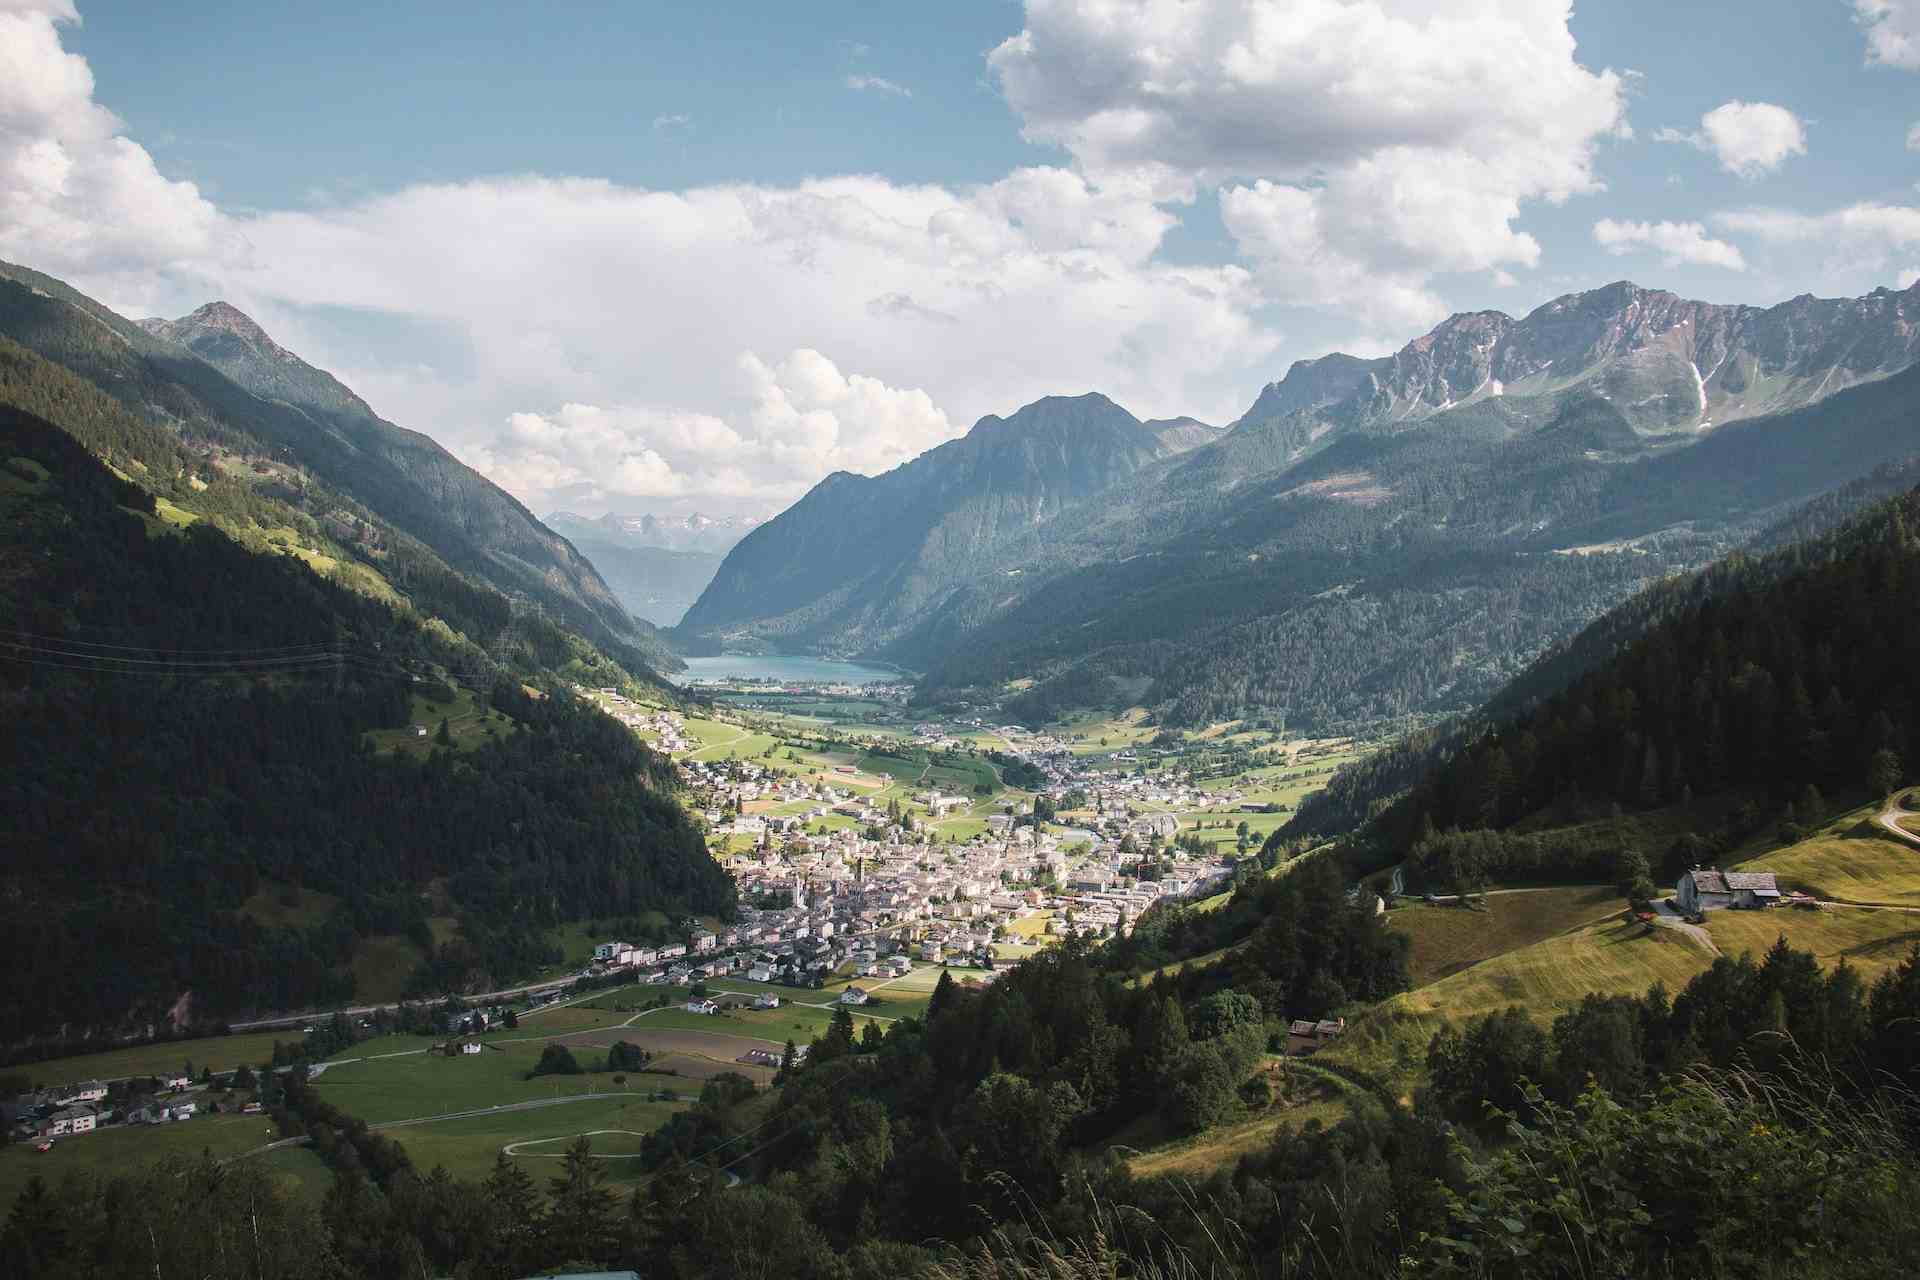 Sot Via, producer in Vnà canton of Grisons in Switzerland